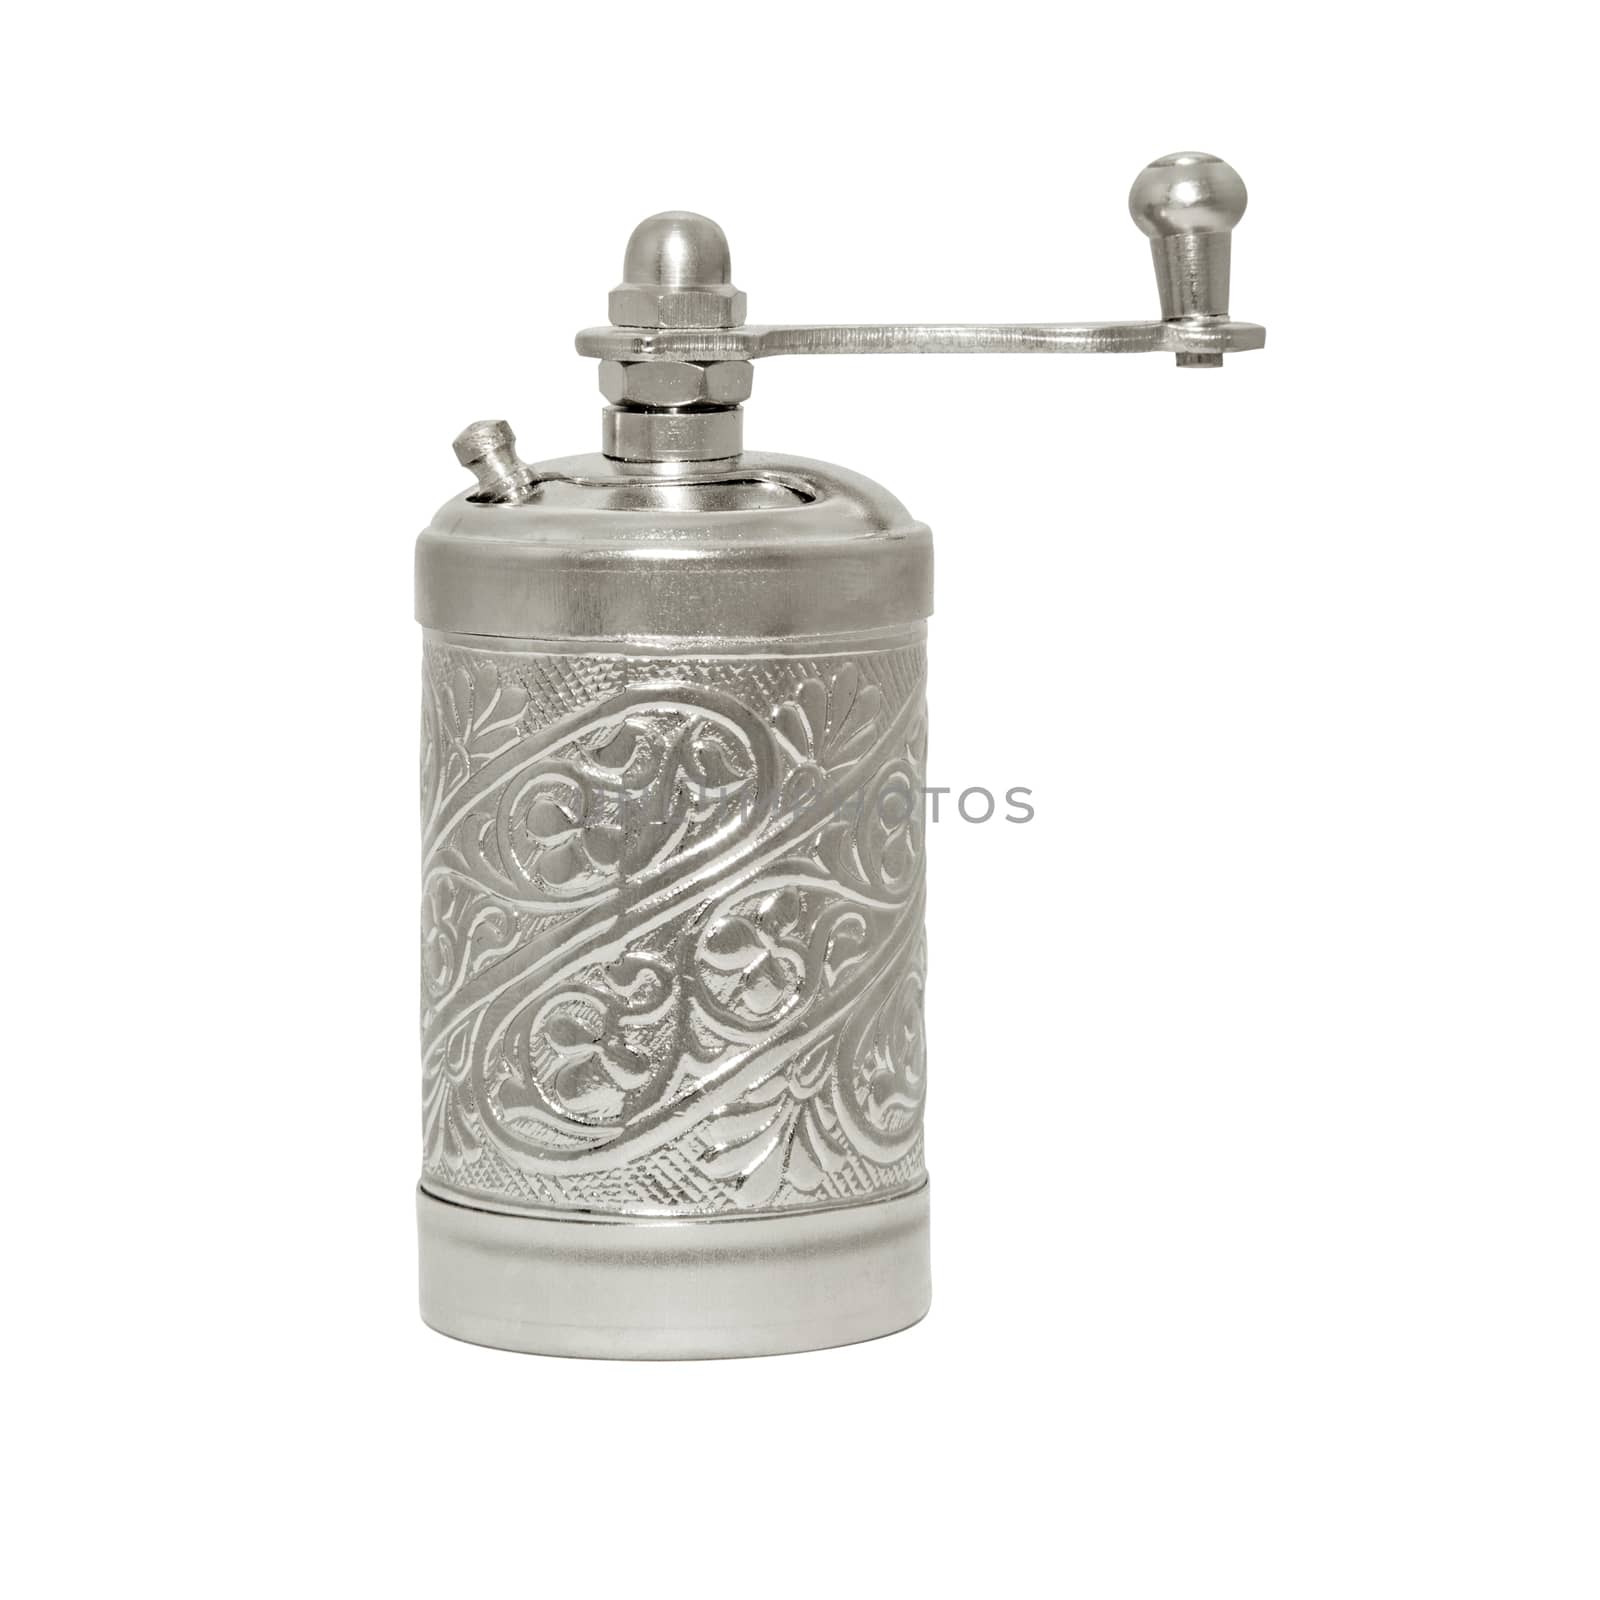 Souvenir spice mill isolated over white background